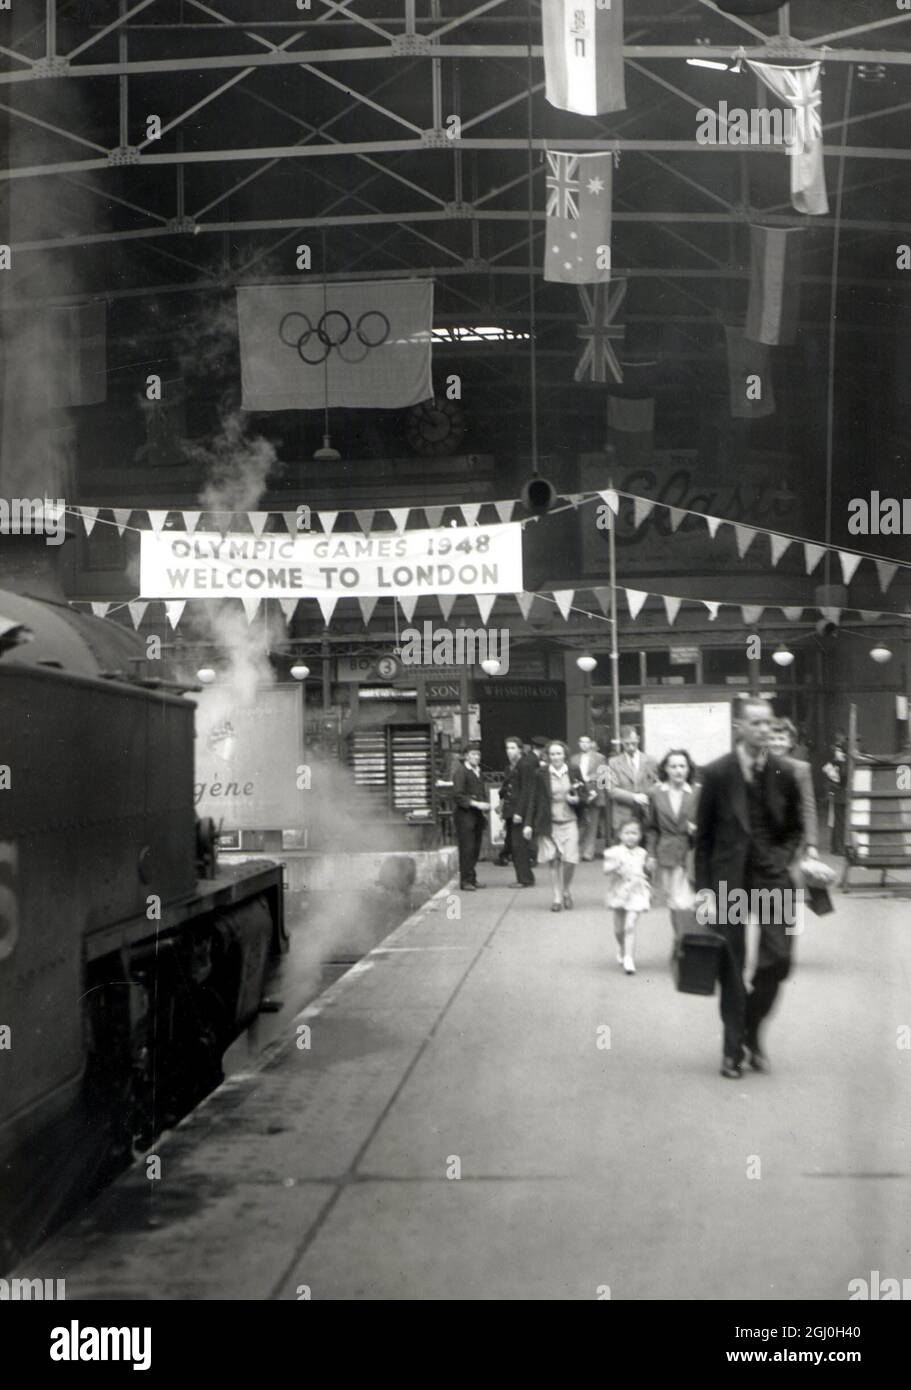 Fredrick Station Olympic Banners Welcome Visitors 20 July 1948 Stock Photo